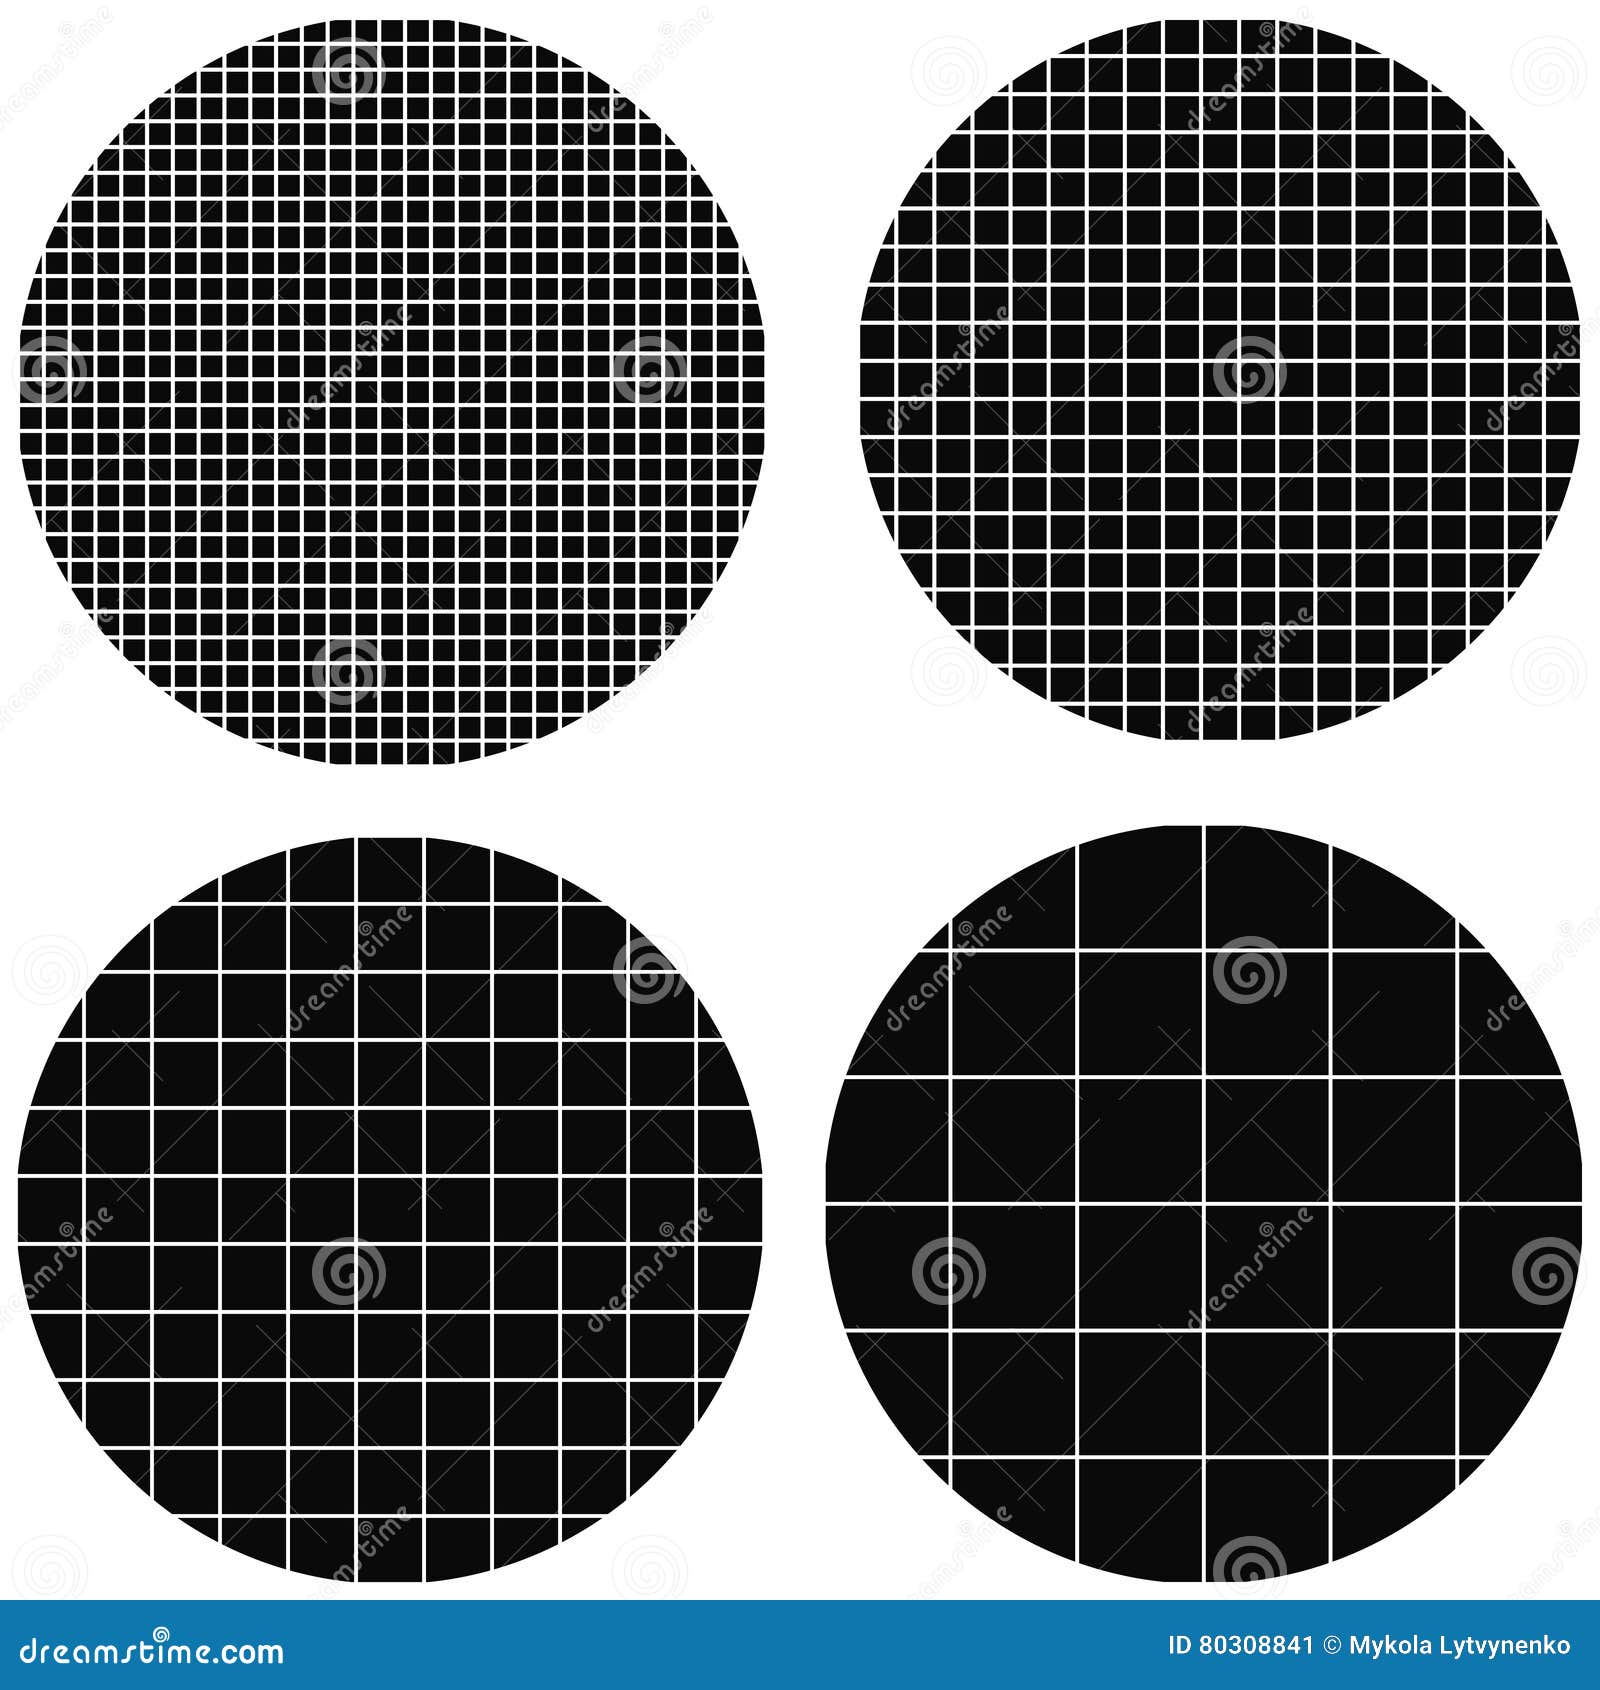 Illustration about Circle made up of squares , a set of circles with a squa...